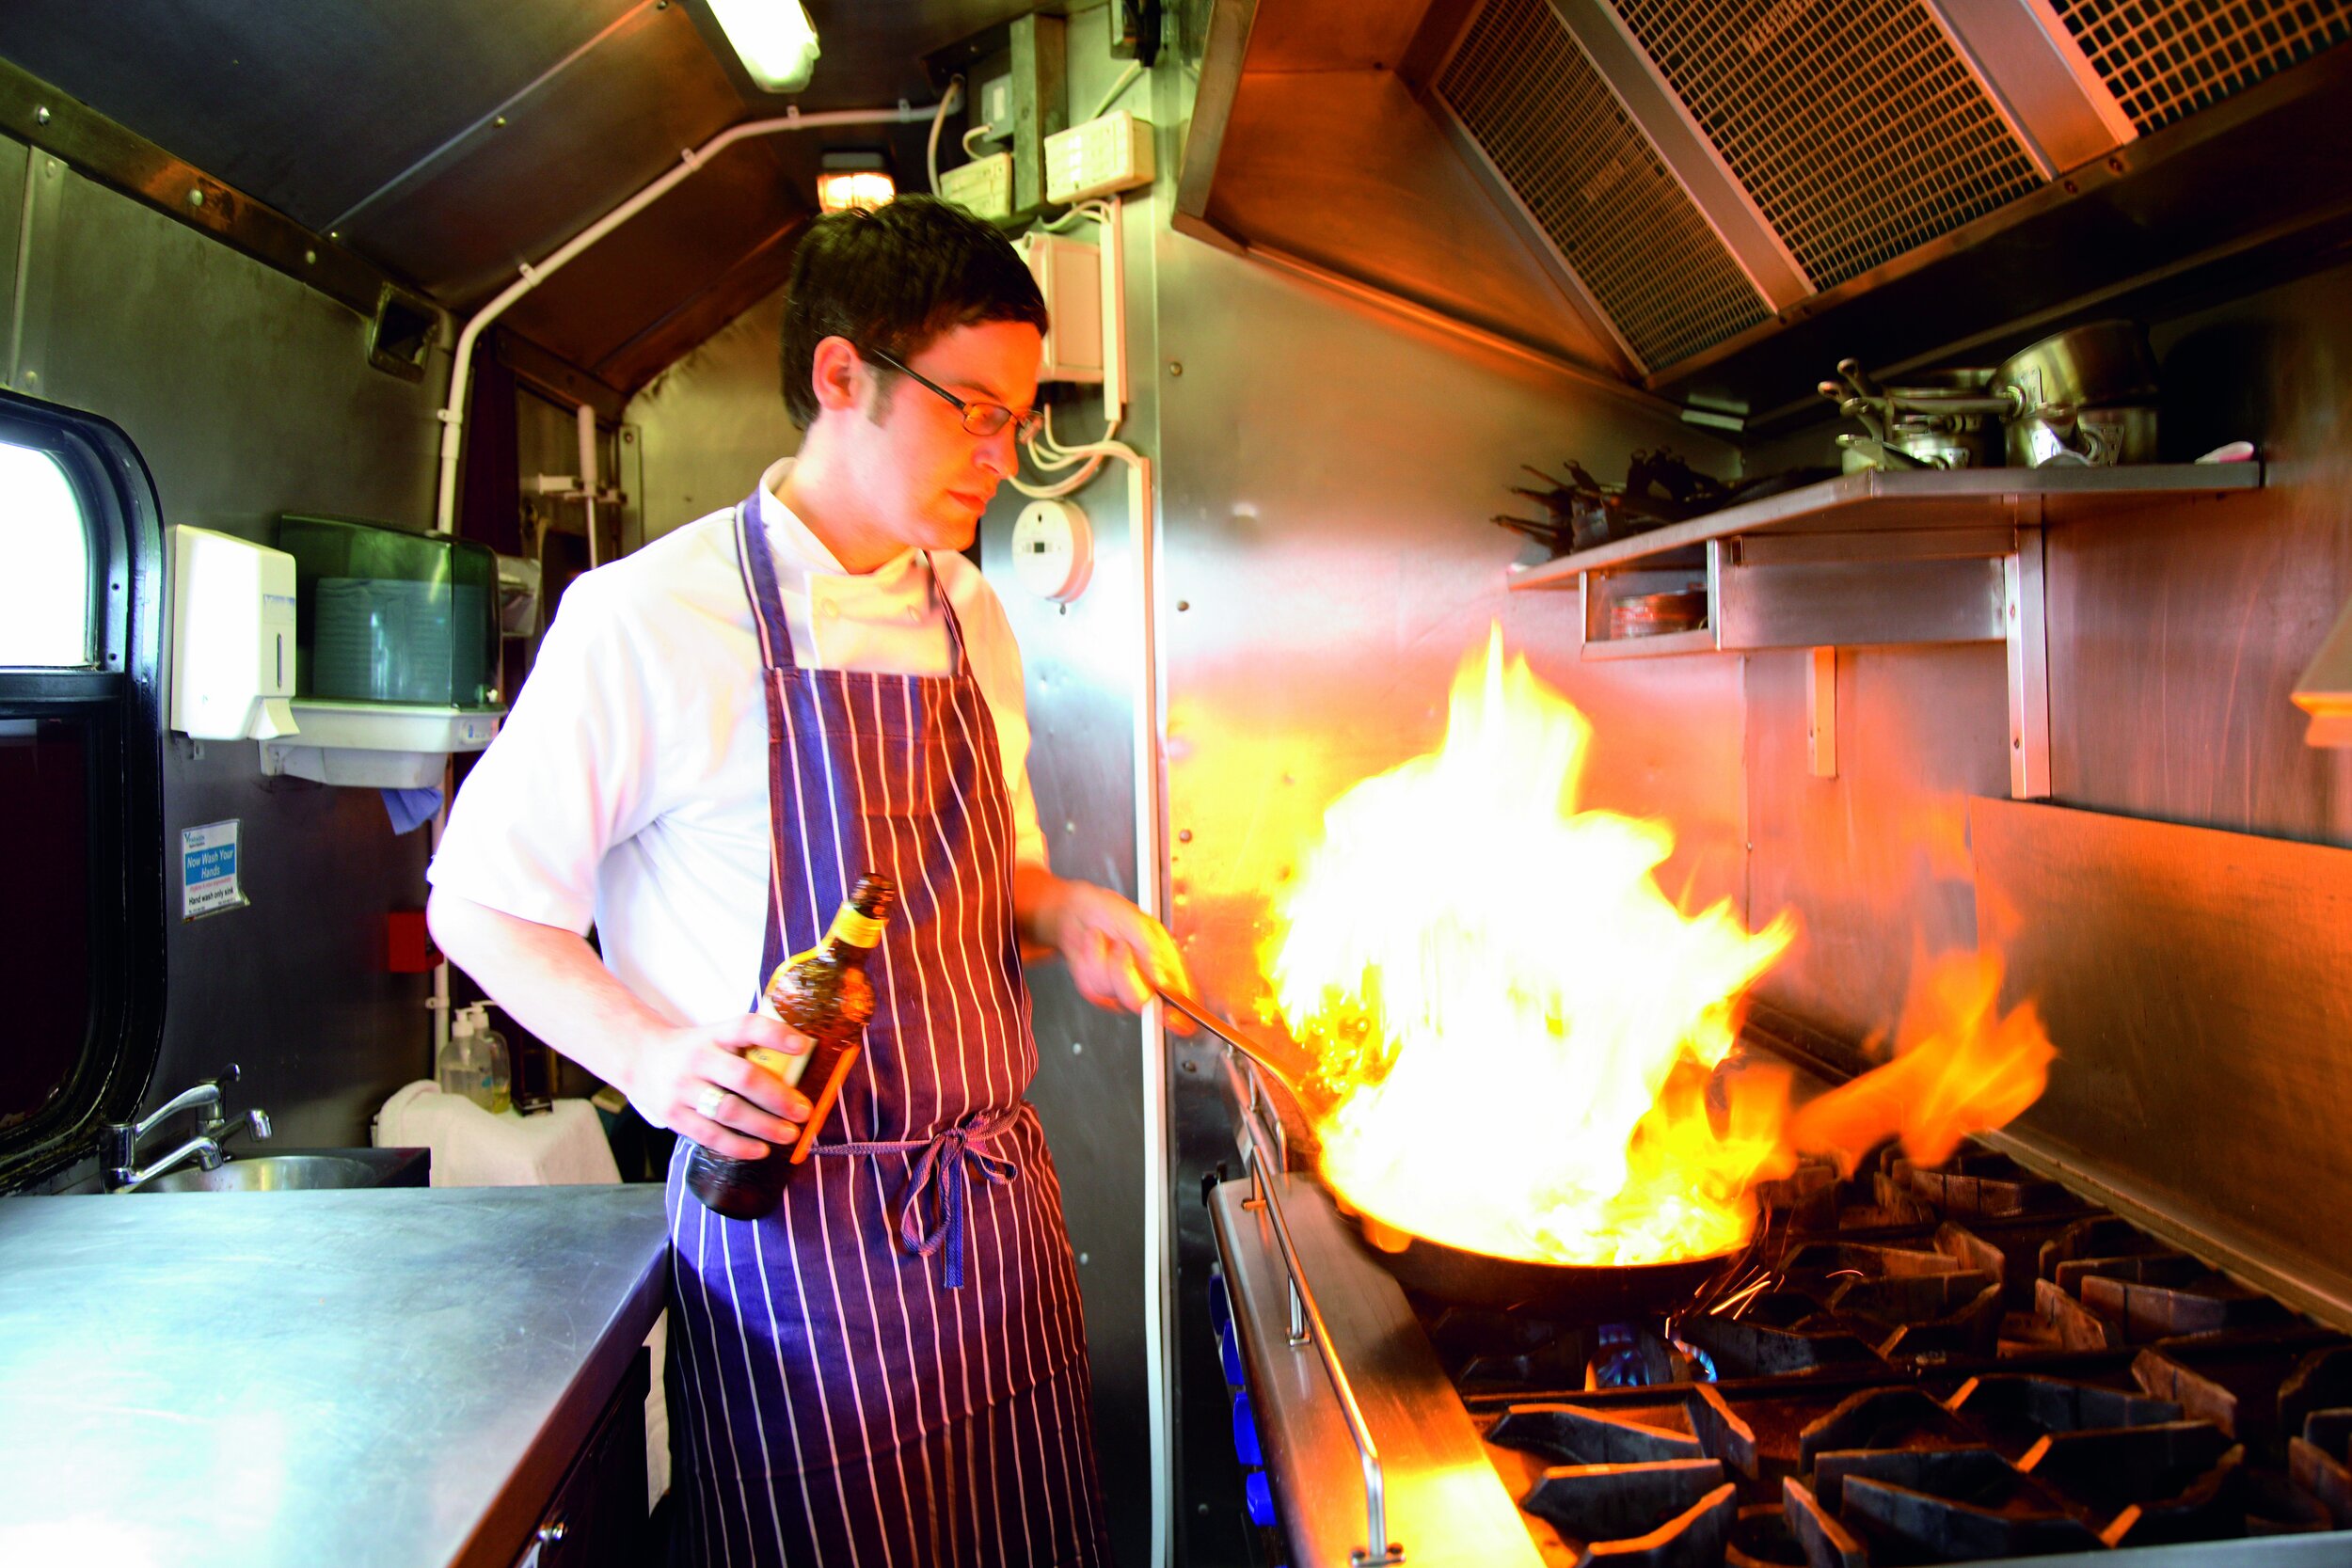   Chef onboard the Belmond Royal Scotsman, where the food is seriously top-notch (photo credit: Belmond)  